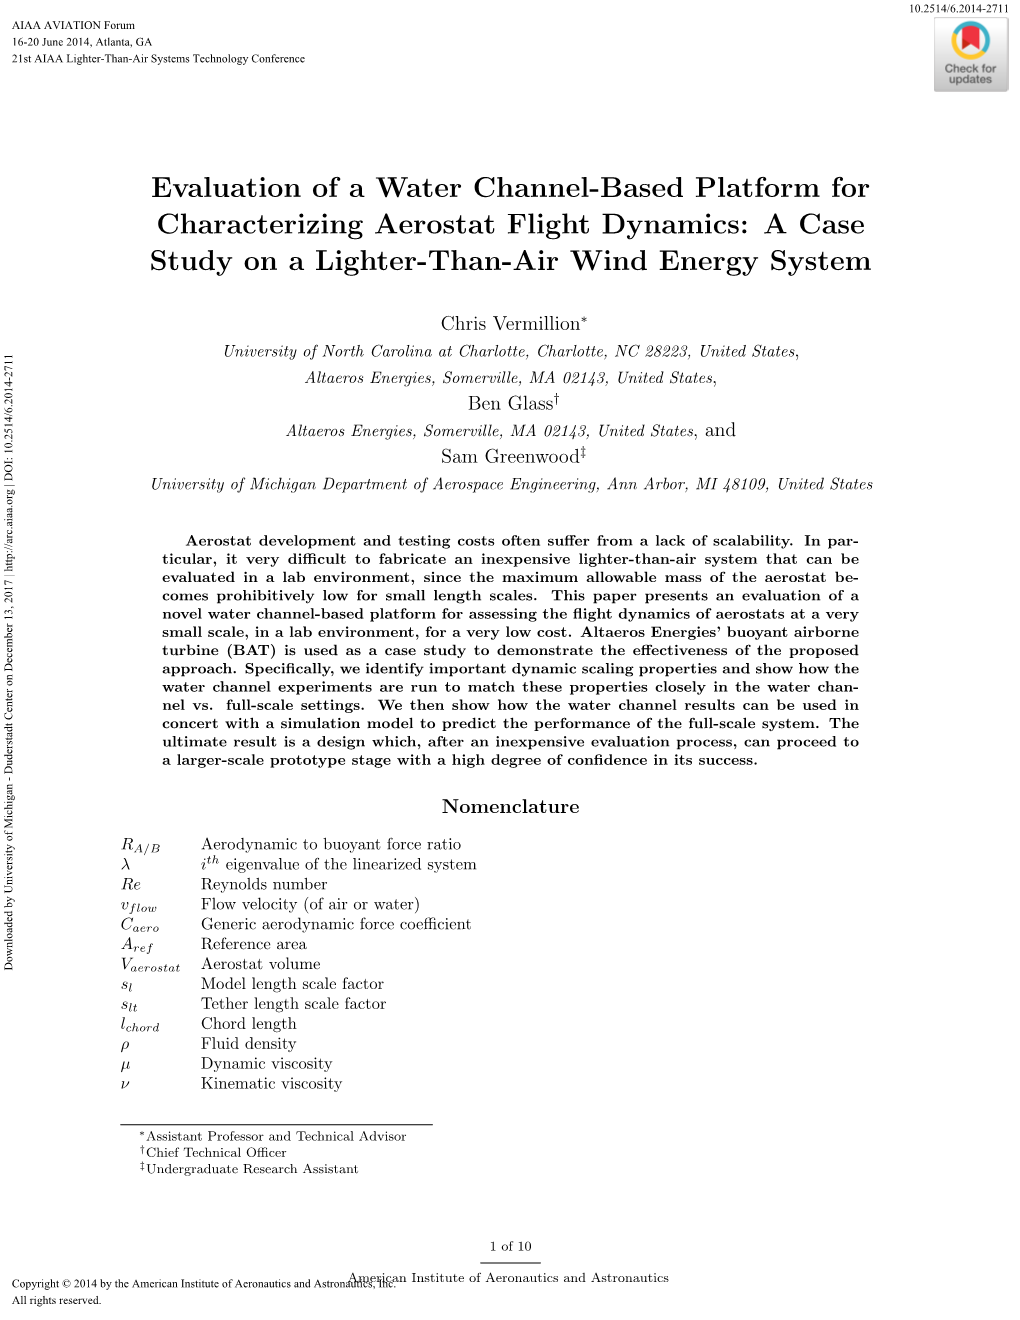 Evaluation of a Water Channel-Based Platform for Characterizing Aerostat Flight Dynamics: a Case Study on a Lighter-Than-Air Wind Energy System